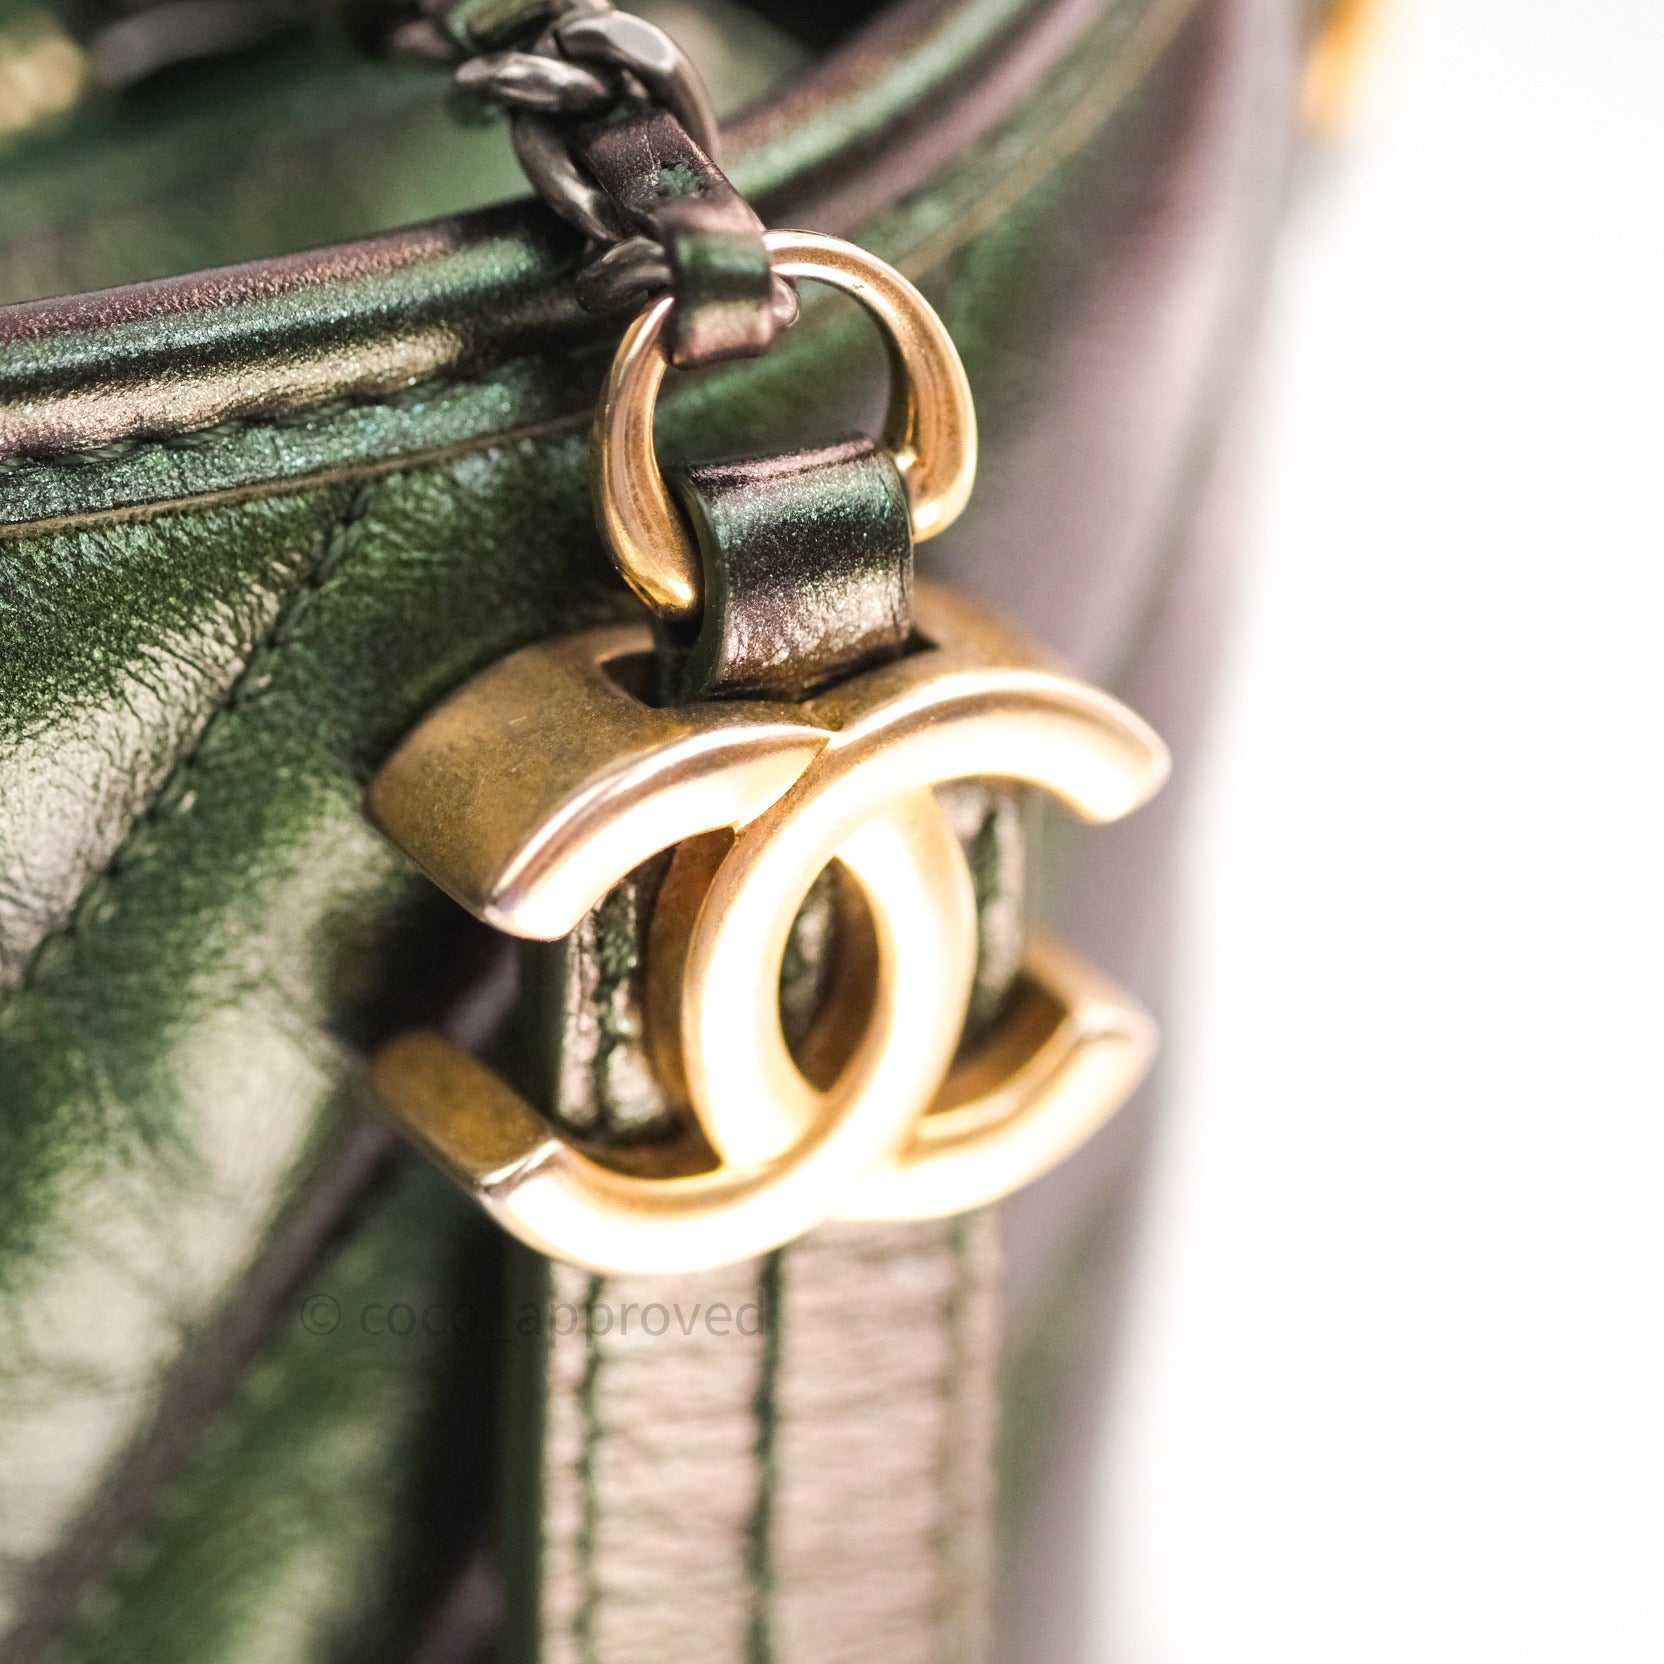 Chanel Metallic Green Chevron Quilted Aged Calfskin Small Gabrielle Hobo  Gold And Ruthenium Hardware, 2019 Available For Immediate Sale At Sotheby's